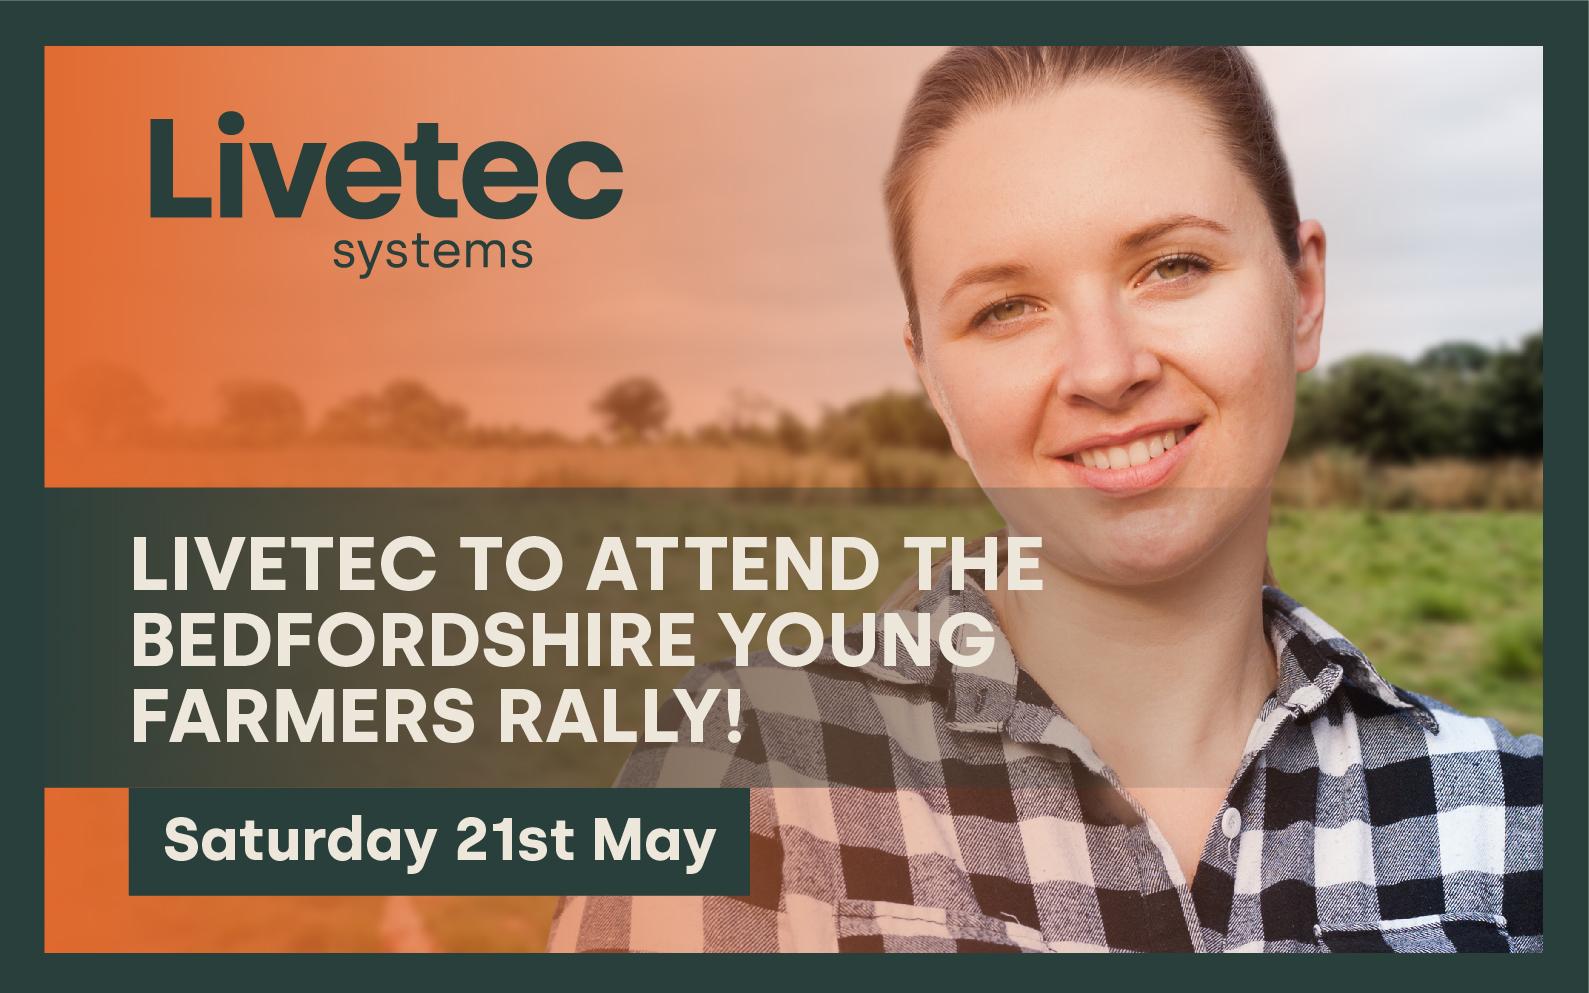 Livetec to attend the Bedfordshire Young Farmers Rally